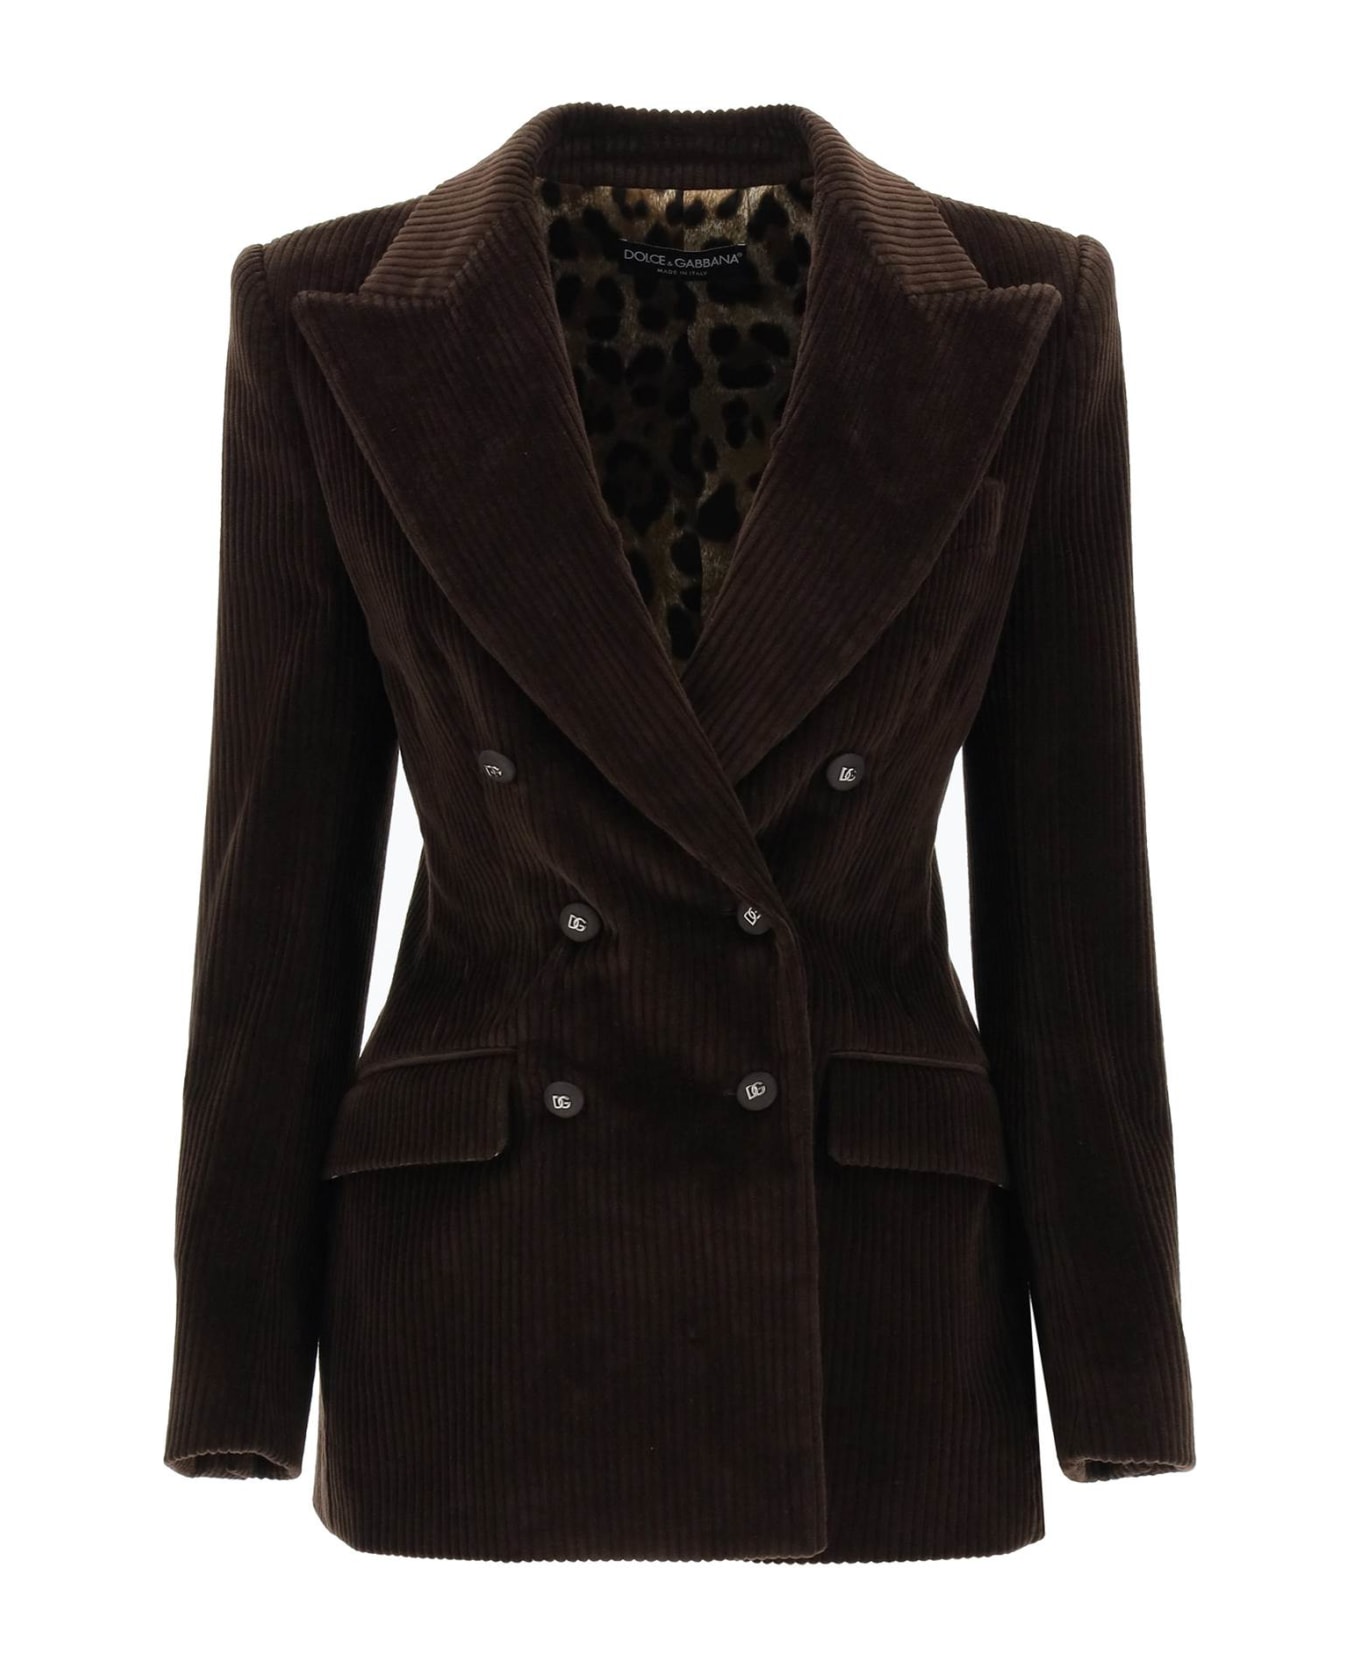 Dolce & Gabbana Double-breasted Corduroy Jacket - MARRONE SCURO 3 (Brown)